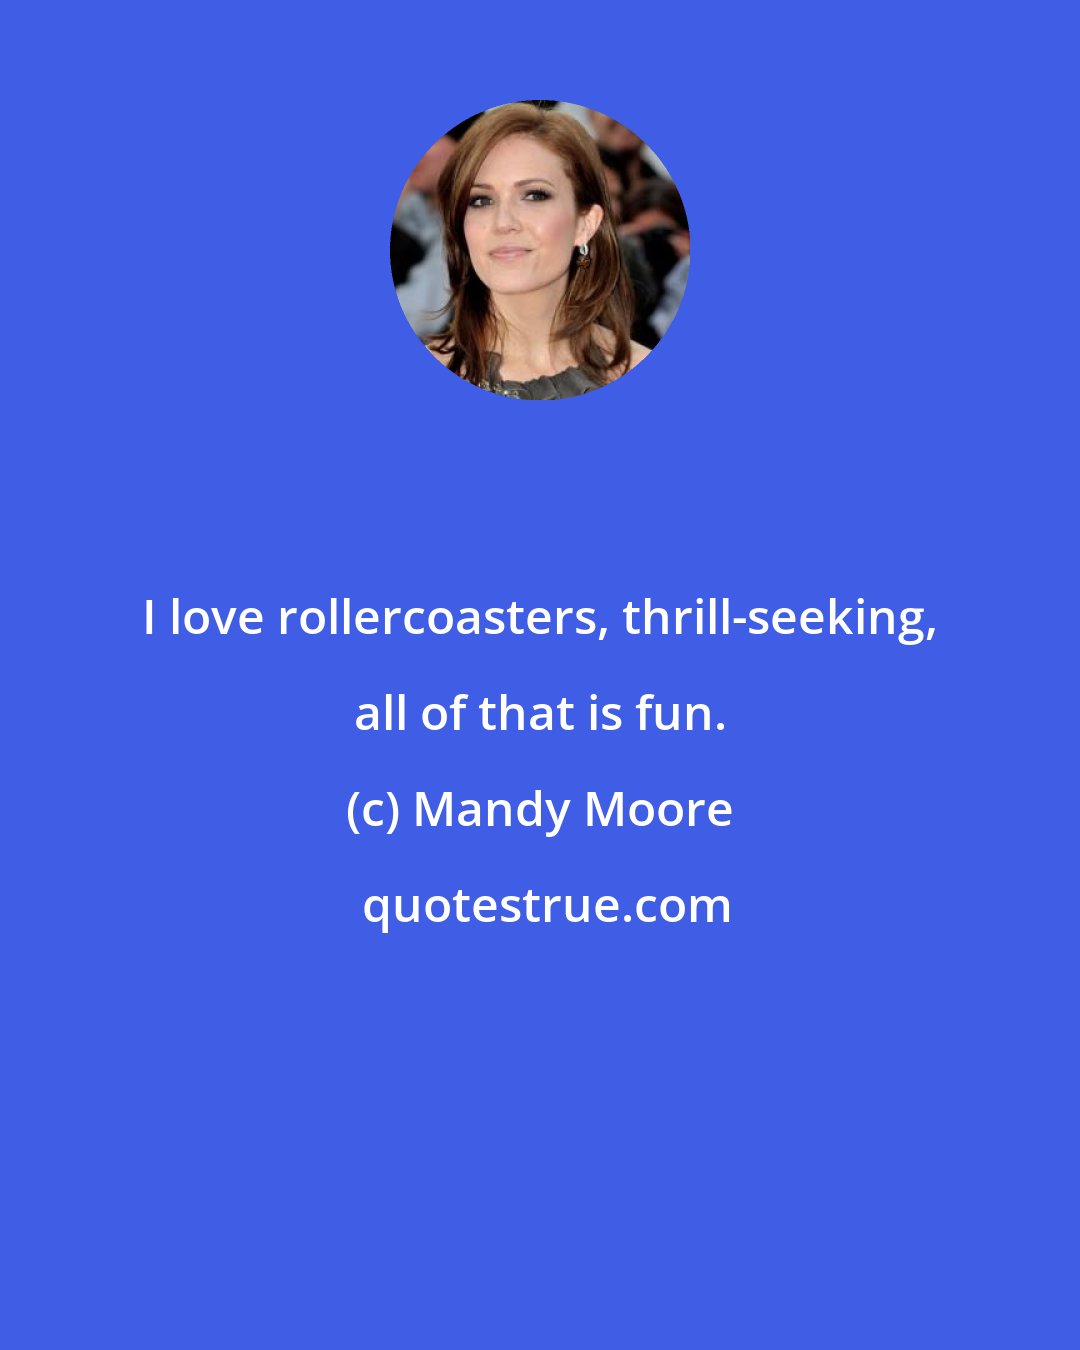 Mandy Moore: I love rollercoasters, thrill-seeking, all of that is fun.